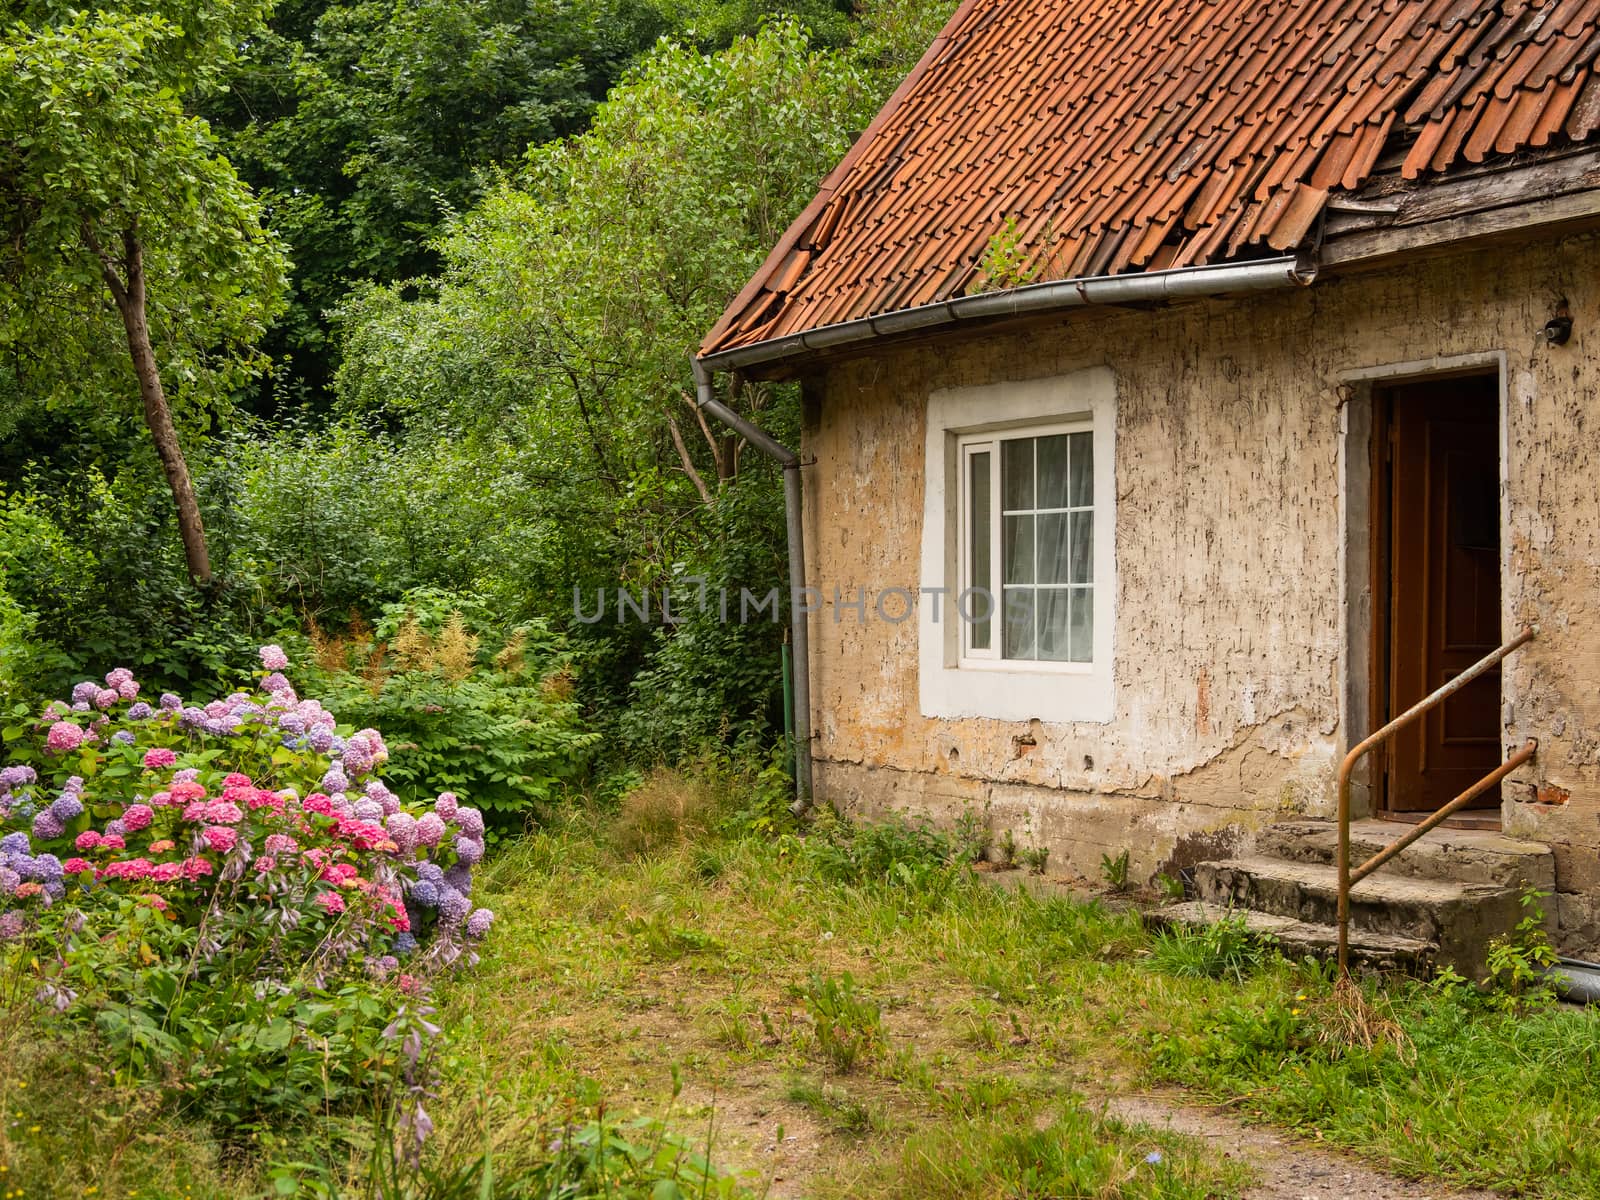 Picturesque old country house with tiled roof . Neglected garden with big bushes of colorful hydrangea flowers. by aksenovko